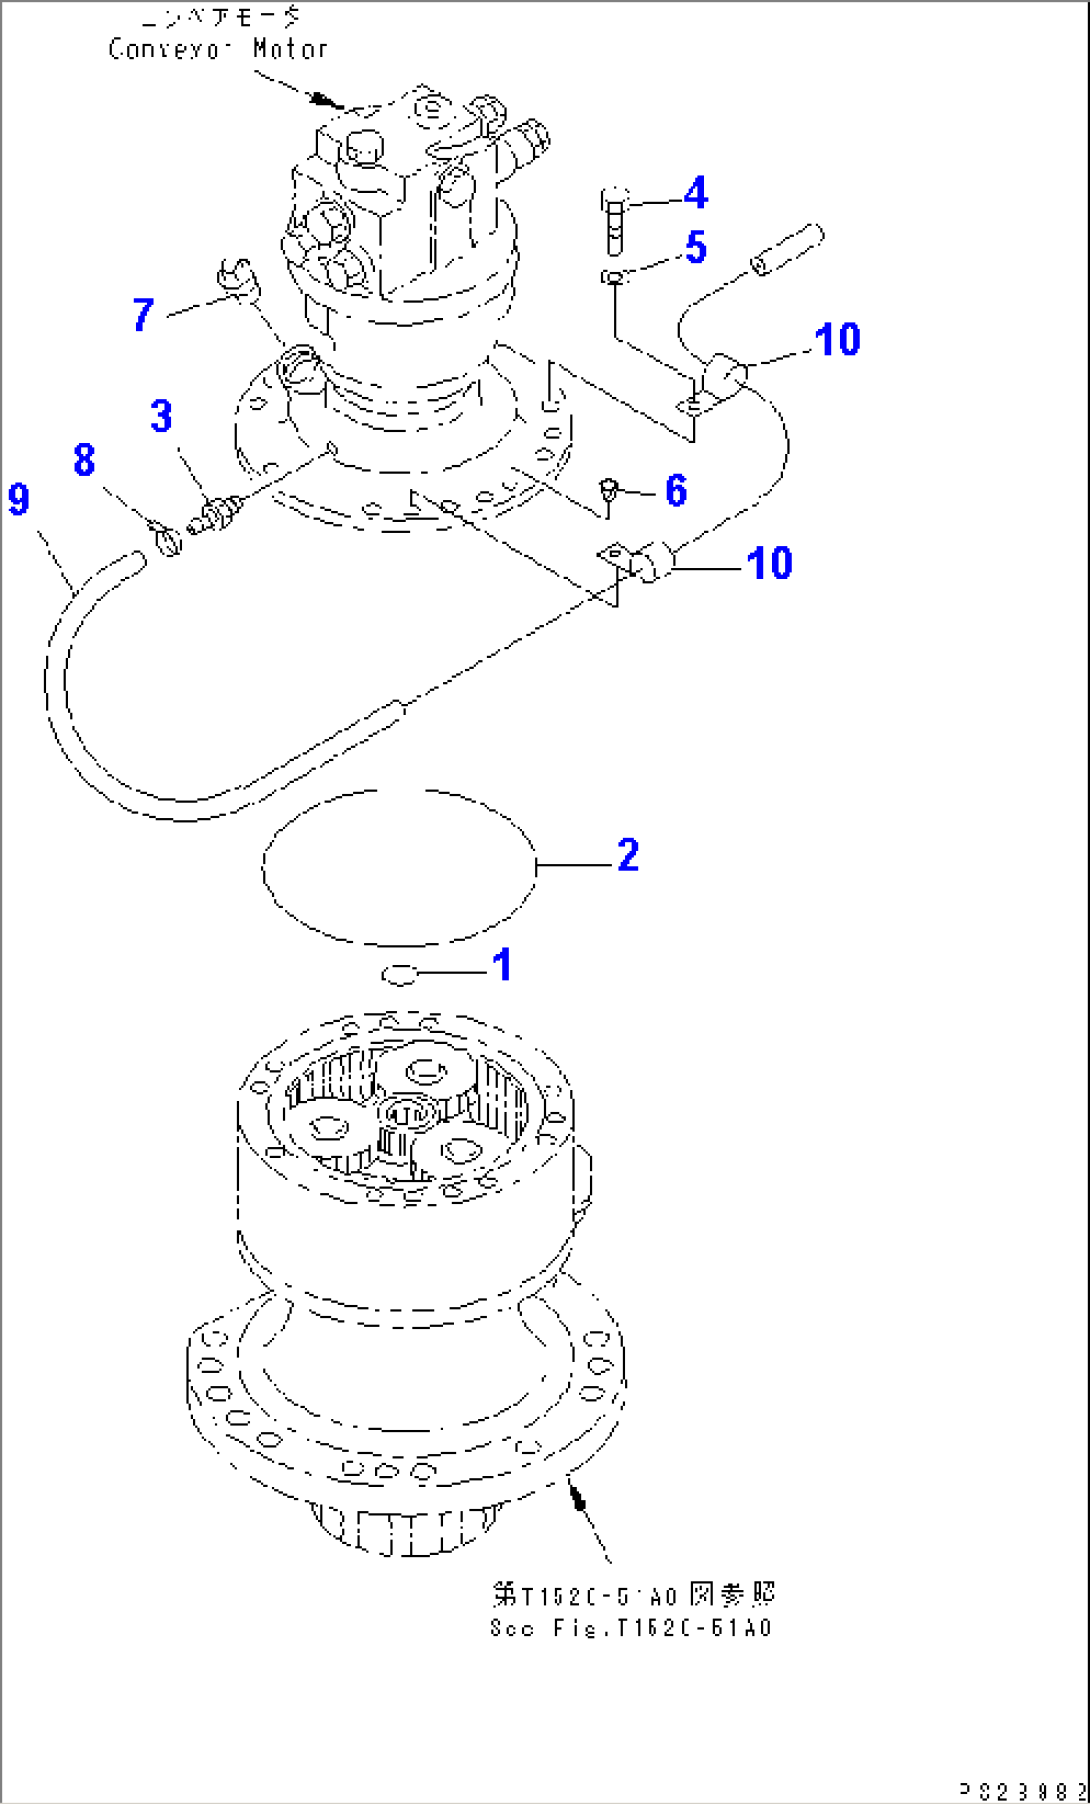 CONVEYOR MOTOR (4/4) (RELATED PARTS)